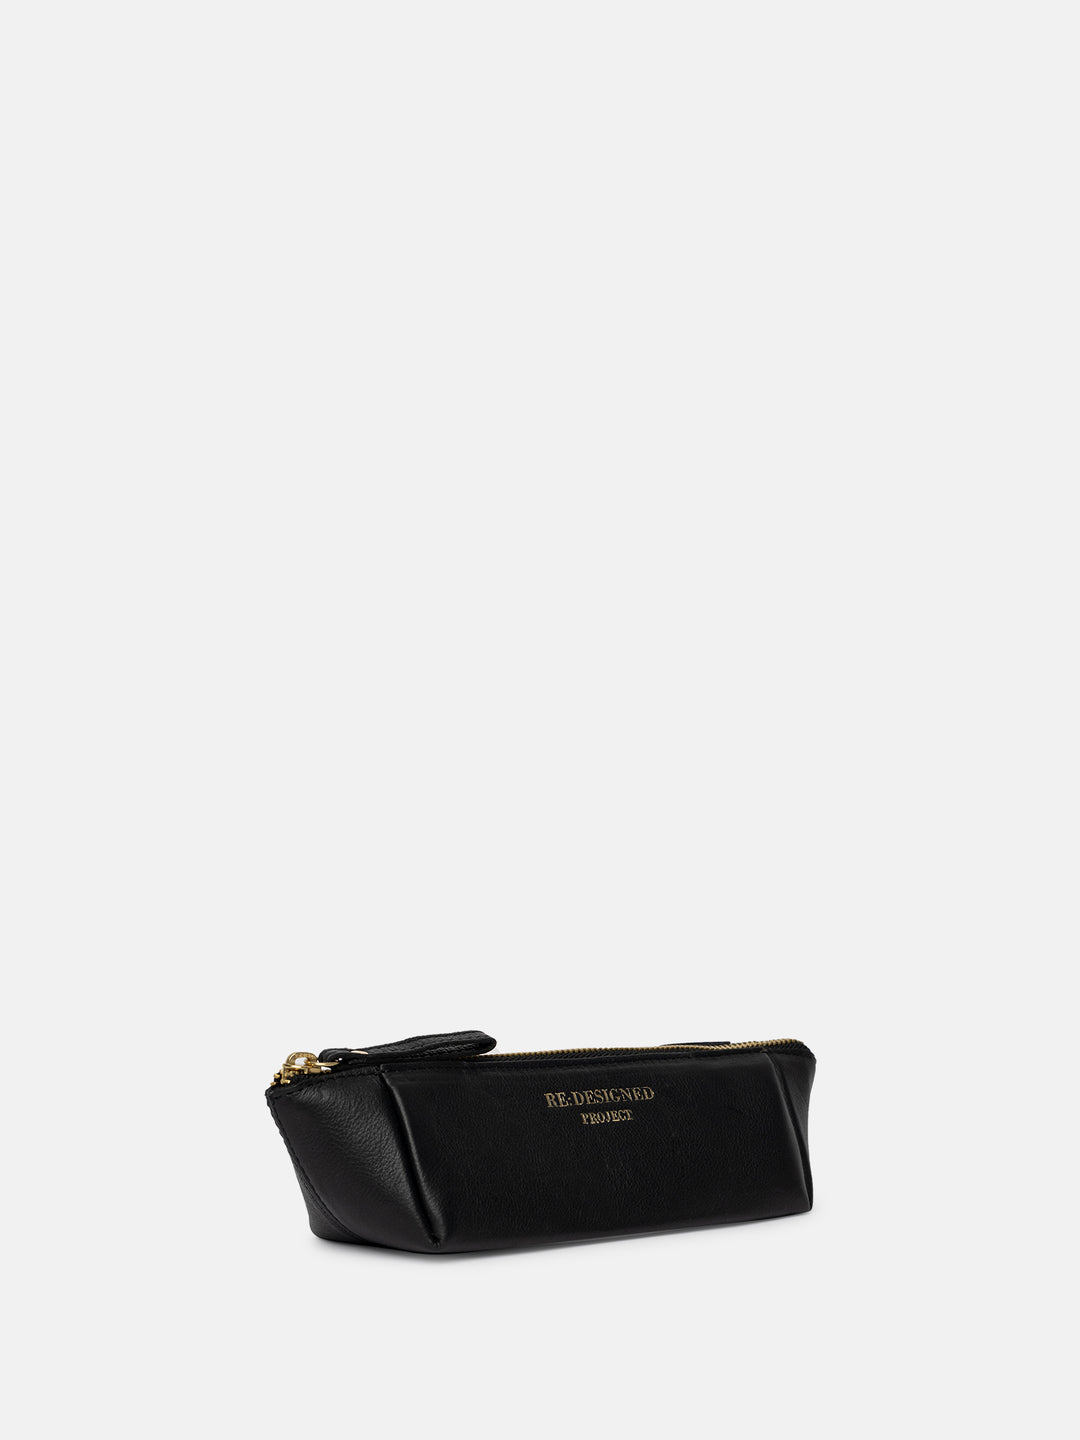 PROJECT Project 11 Organizer Black/Gold